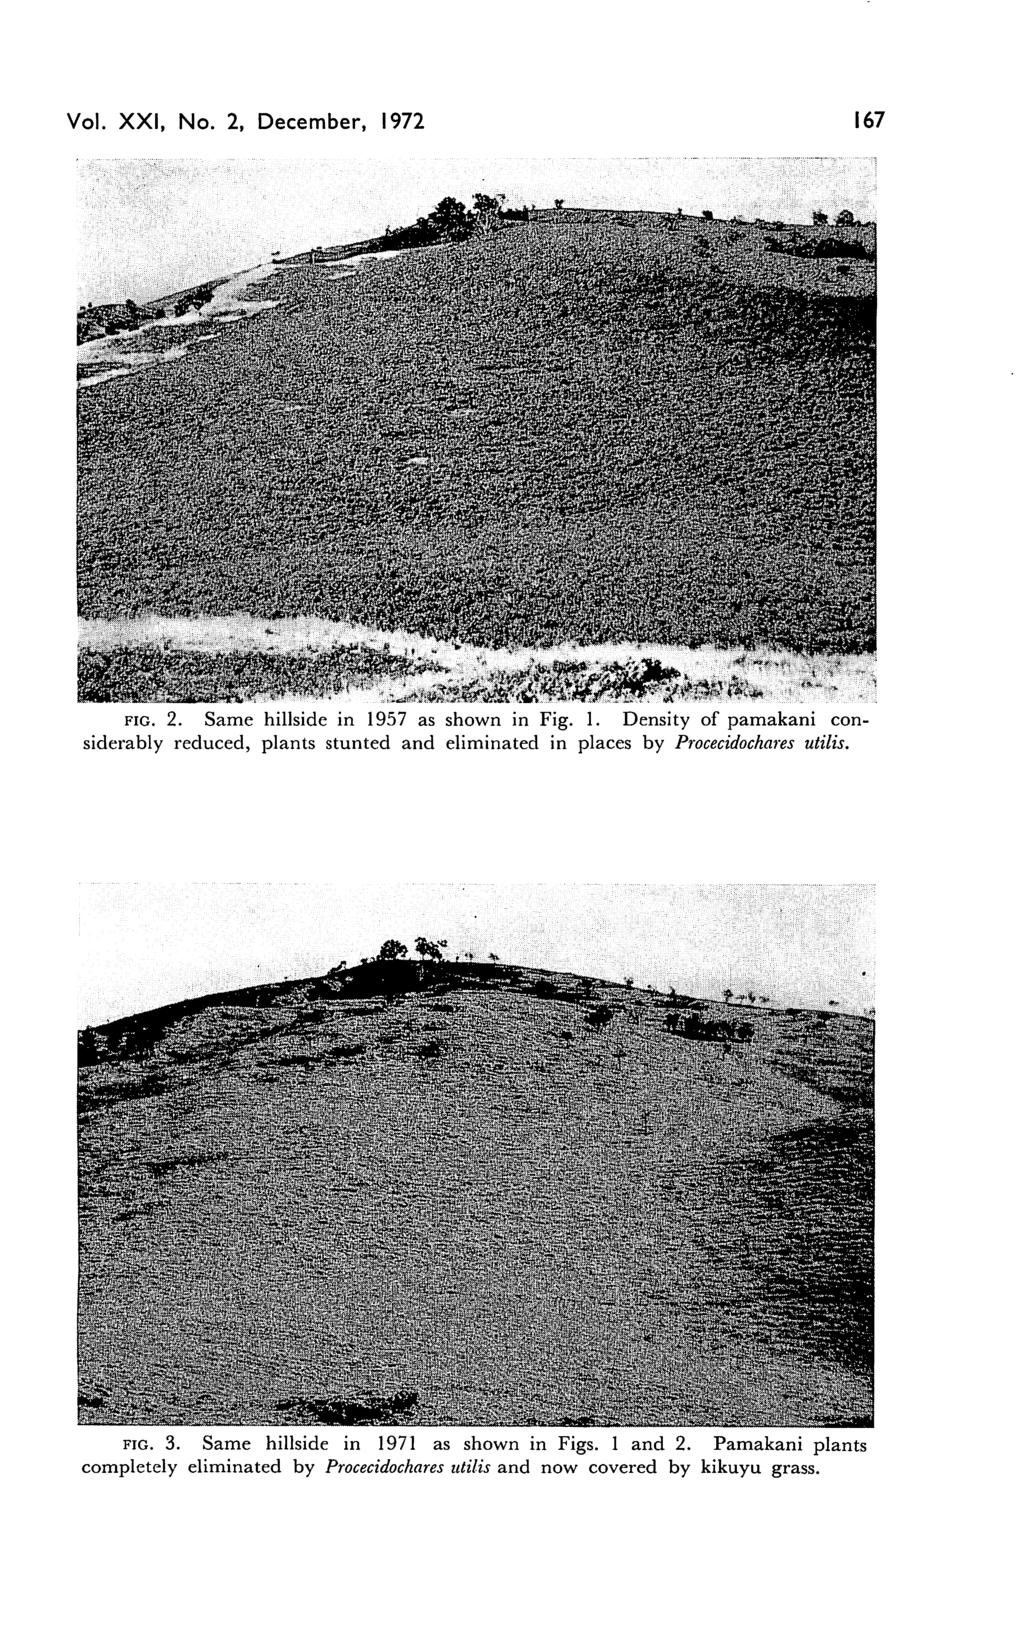 Vol. XXI, No. 2, December, 1972 167 fig. 2. Same hillside in 1957 as shown in Fig. 1. Density of pamakani con siderably reduced, plants stunted and eliminated in places by Procecidochares utilis.